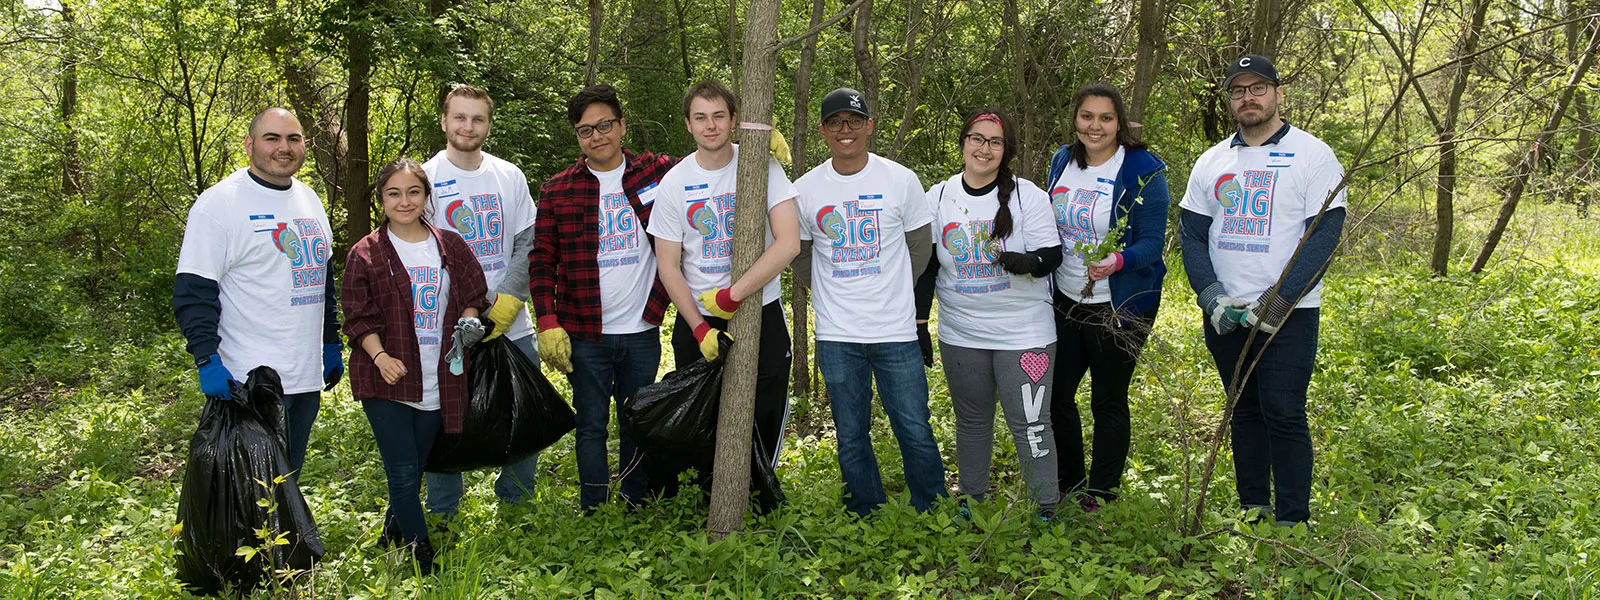 Students clean up a forest preserve during Student Life's annual volunteer day.